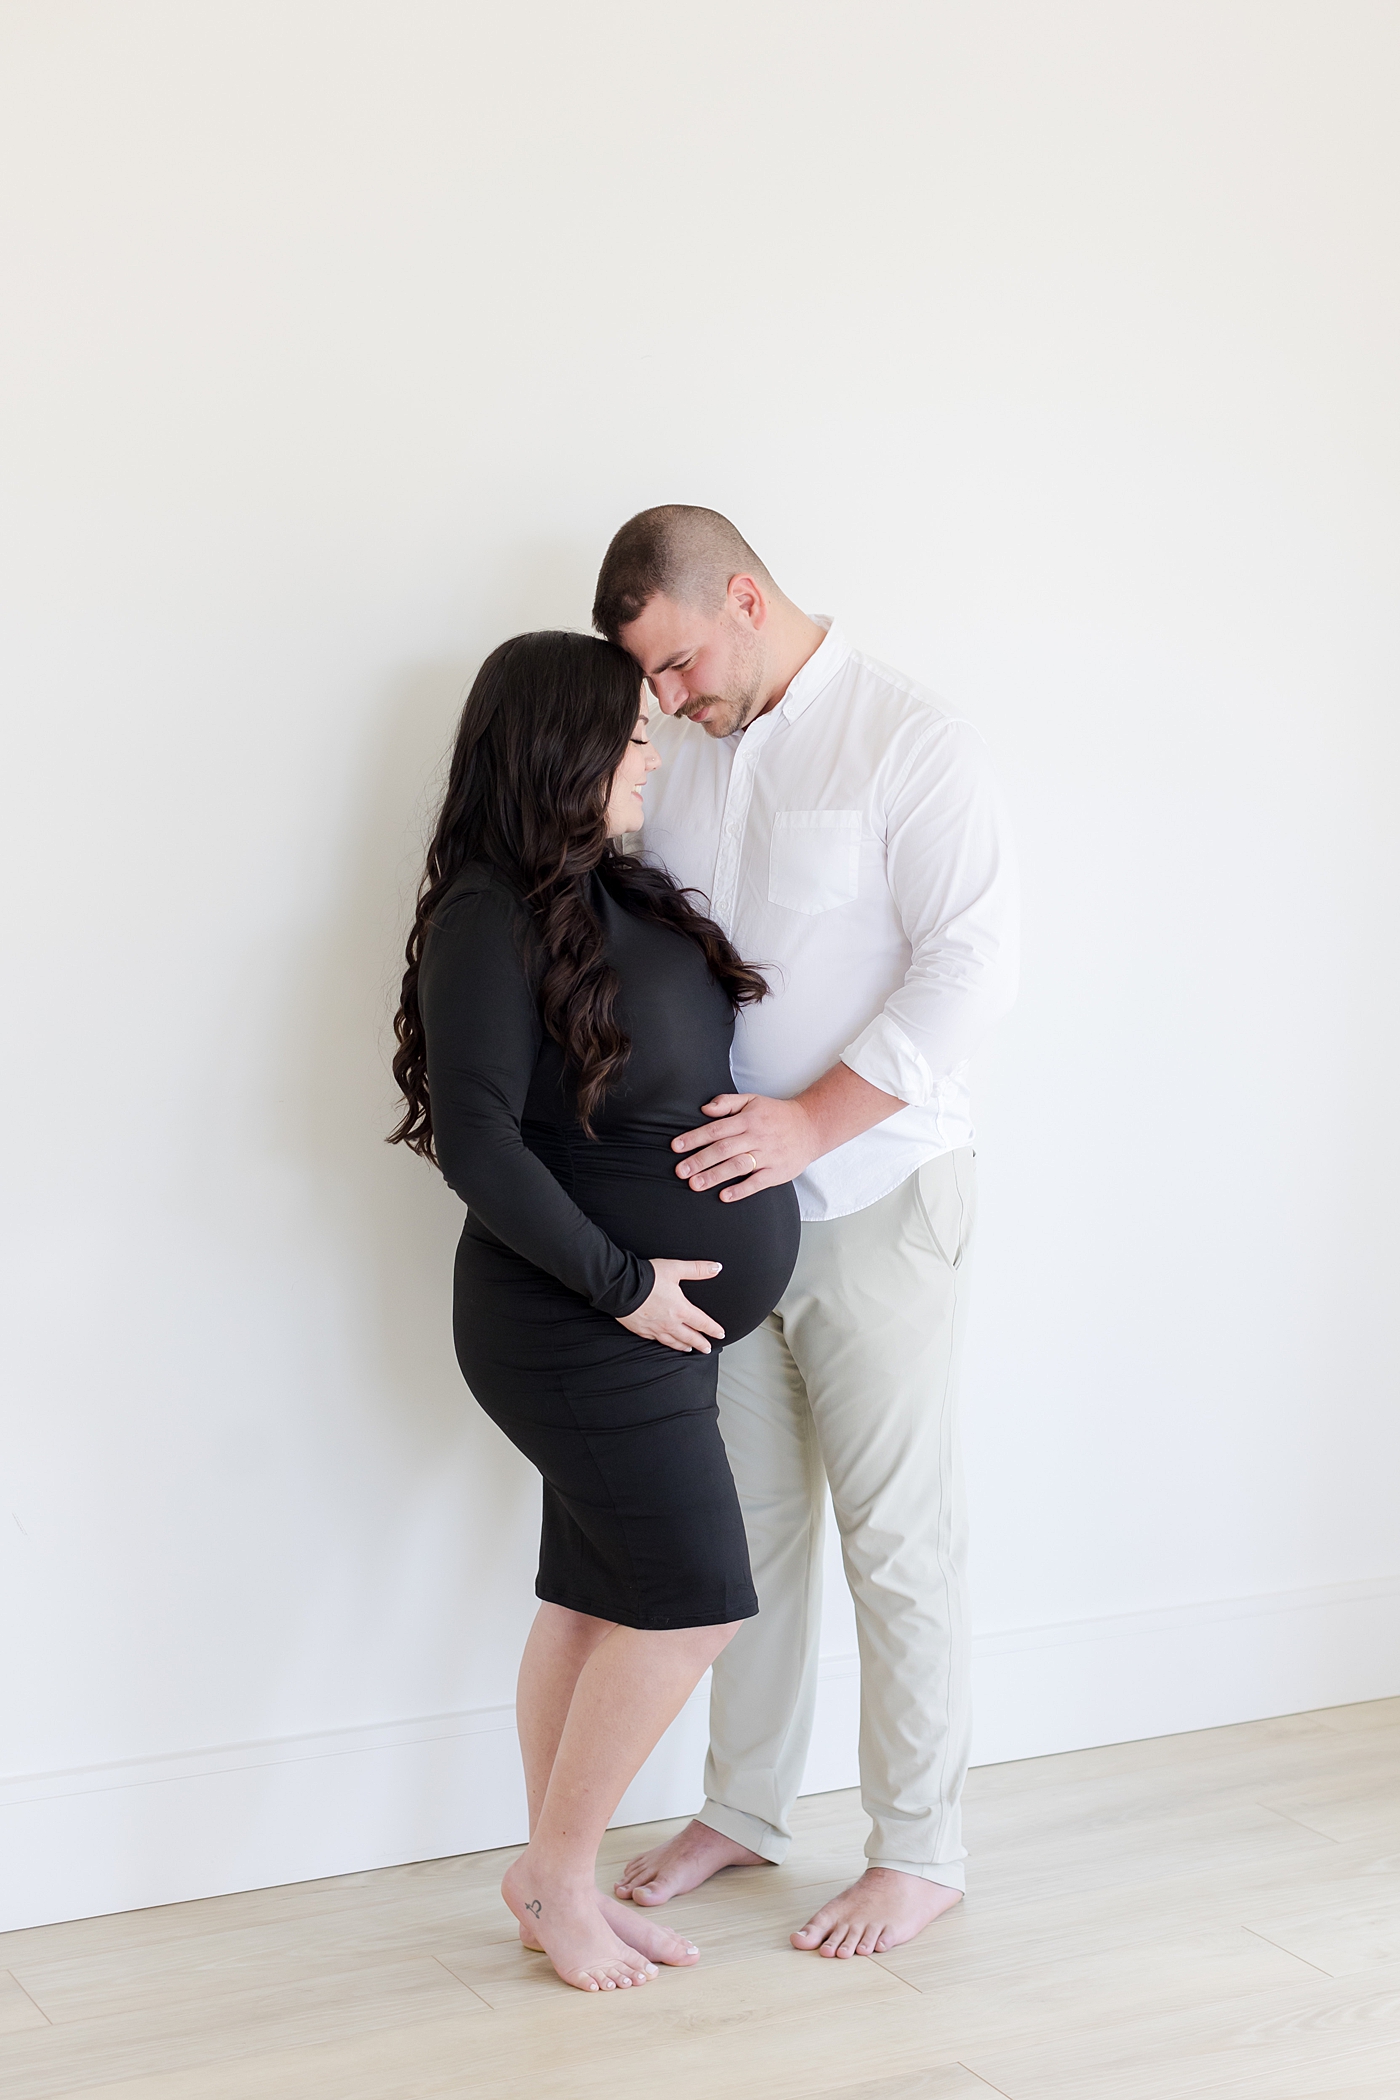 Mom and dad to be in the studio | Image by Emily Gerald Photography